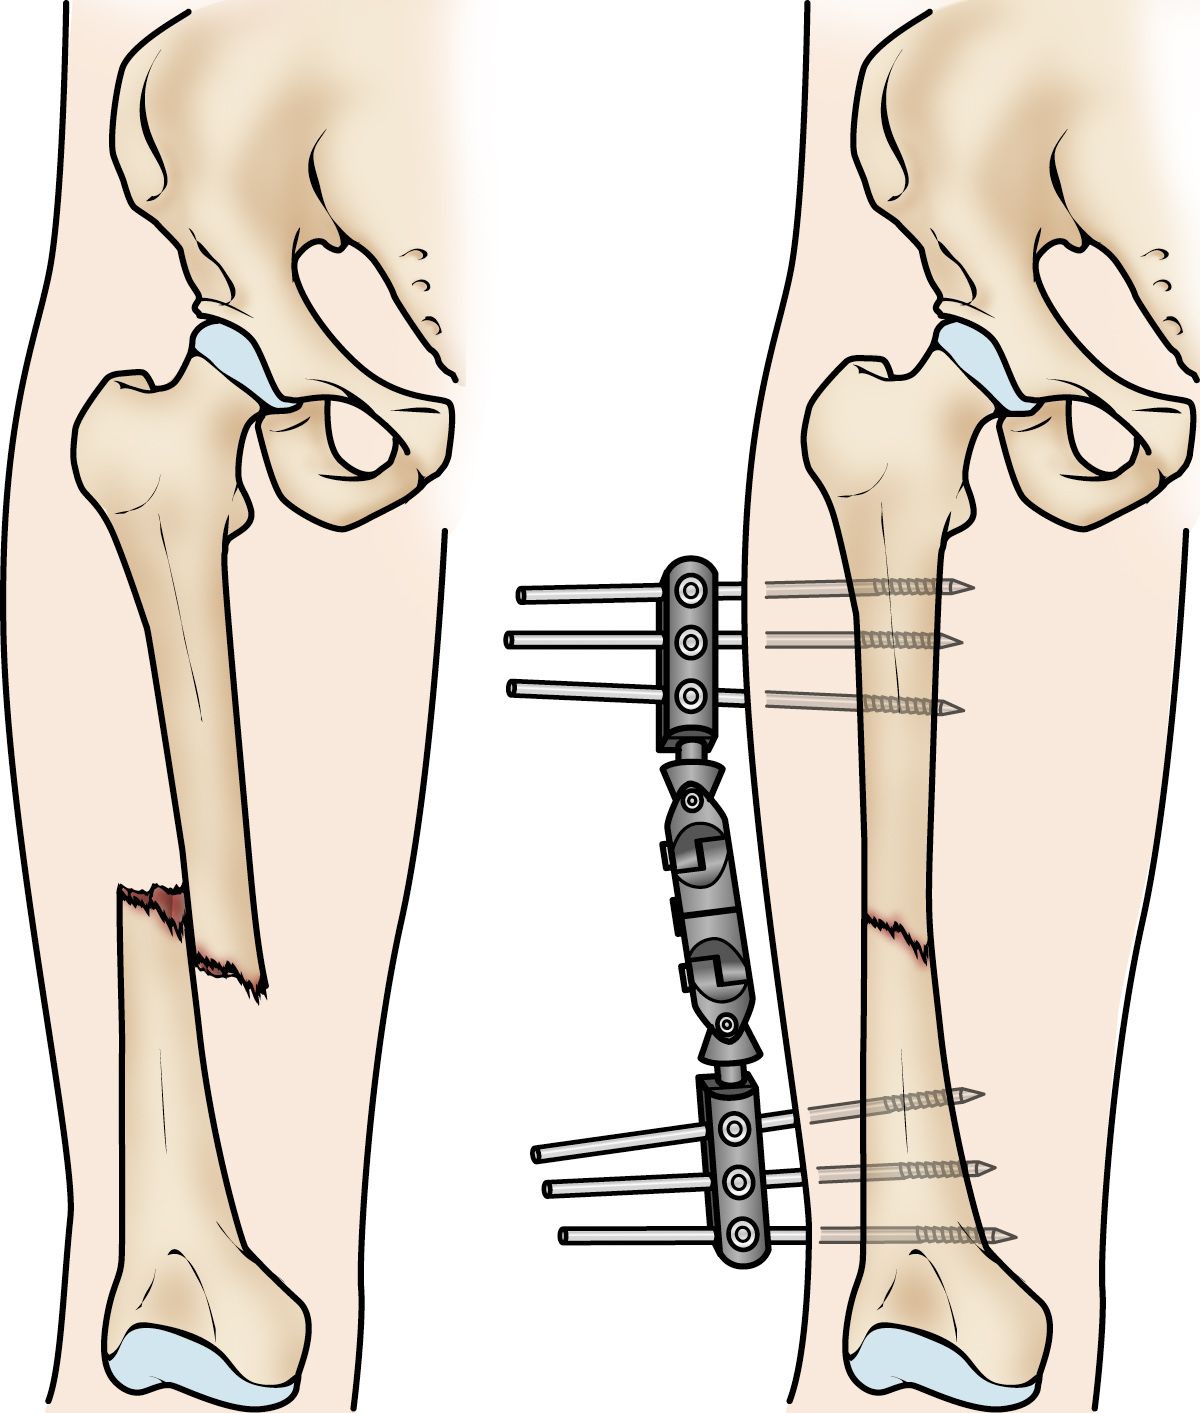 External fixation of a femoral shaft fracture